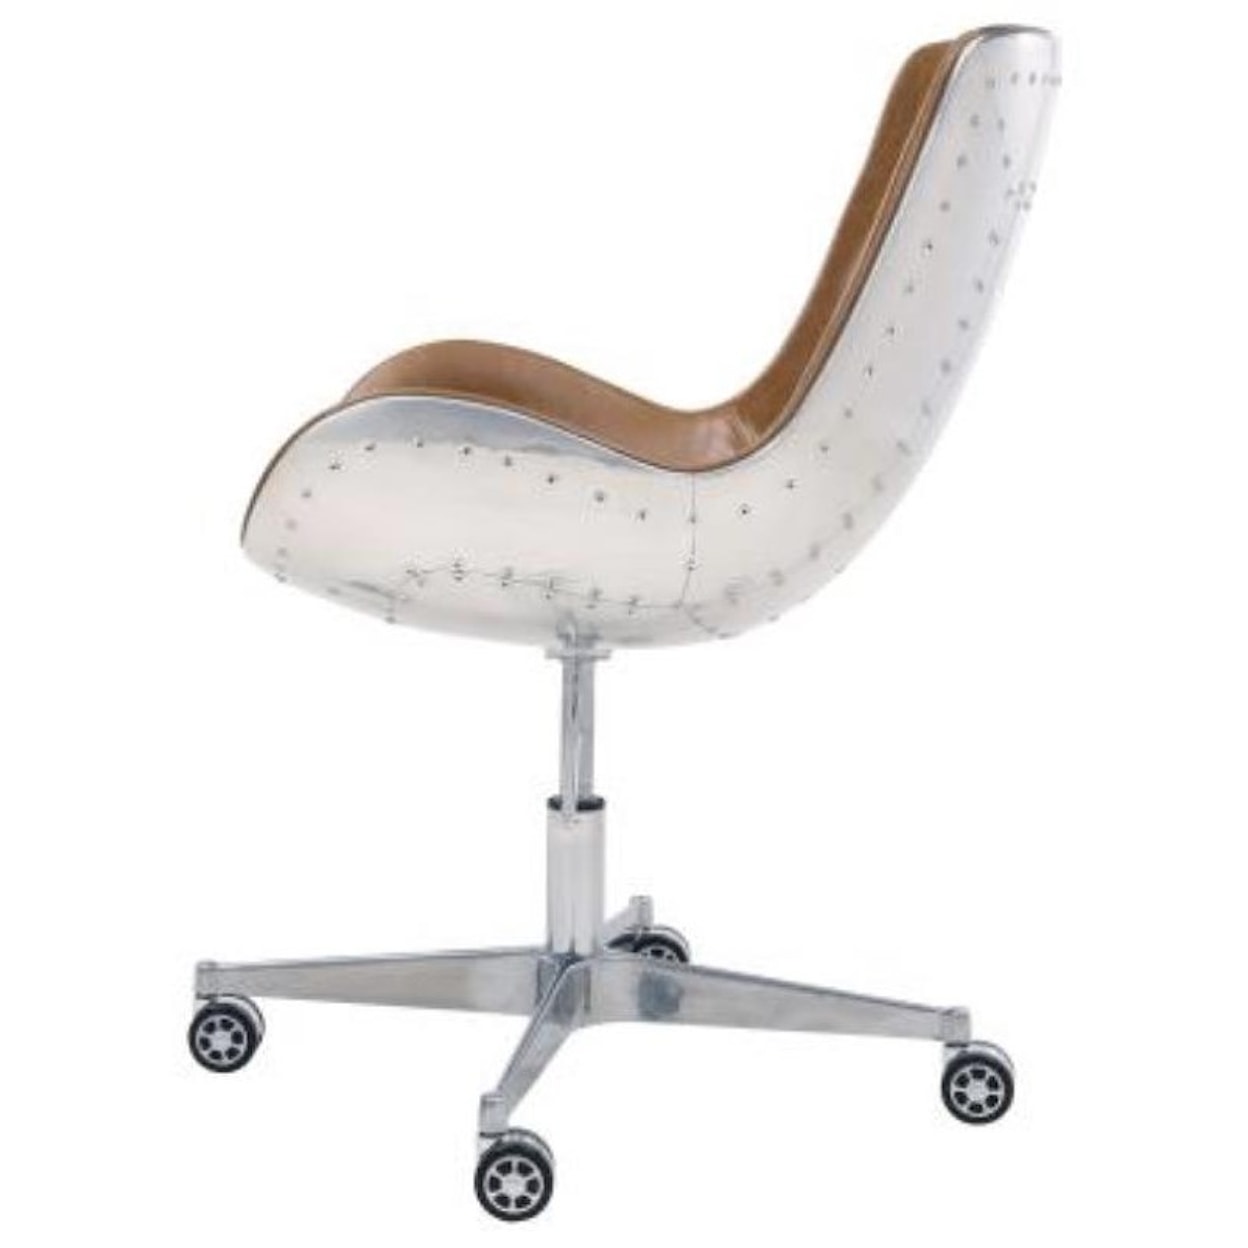 Happy Chair Abner Abner Office Chair, Distresed Caramel